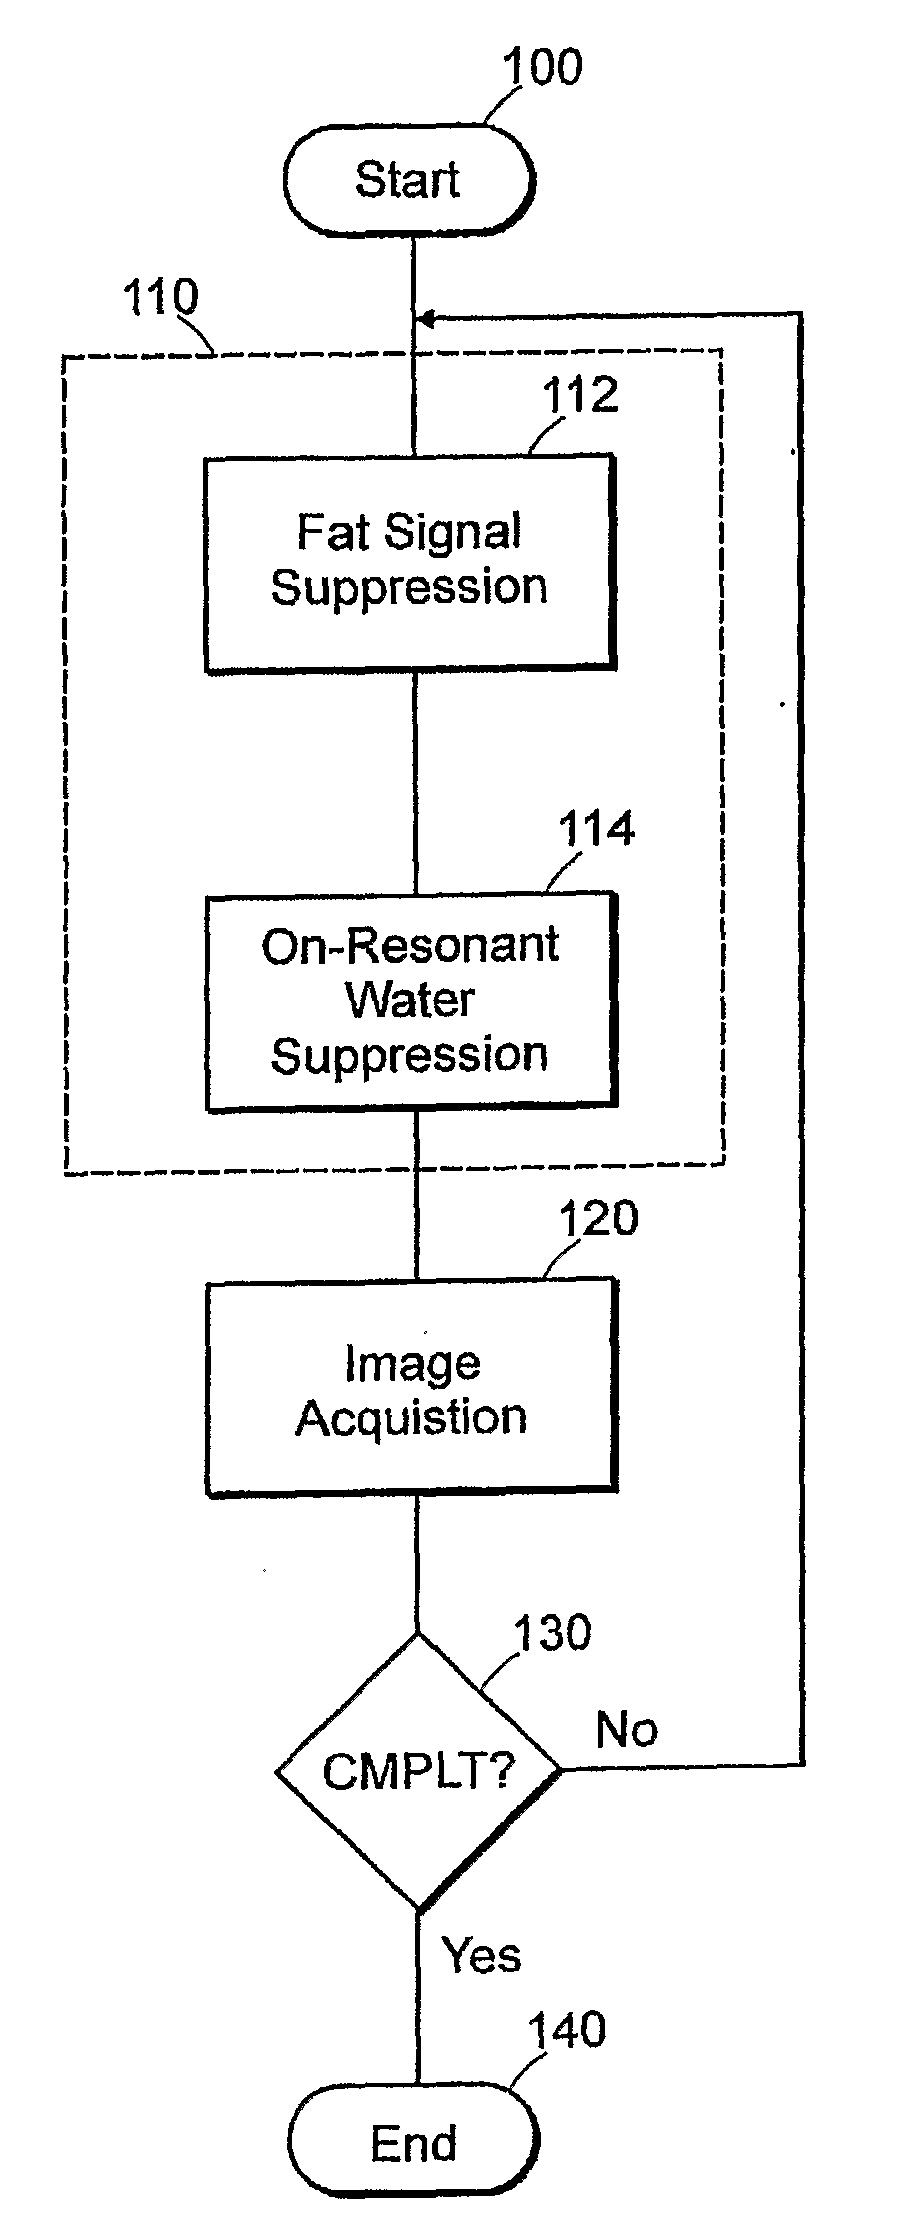 Method for magnetic resonance imaging using inversion recovery with on-resonant water suppression including mri systems and software embodying same